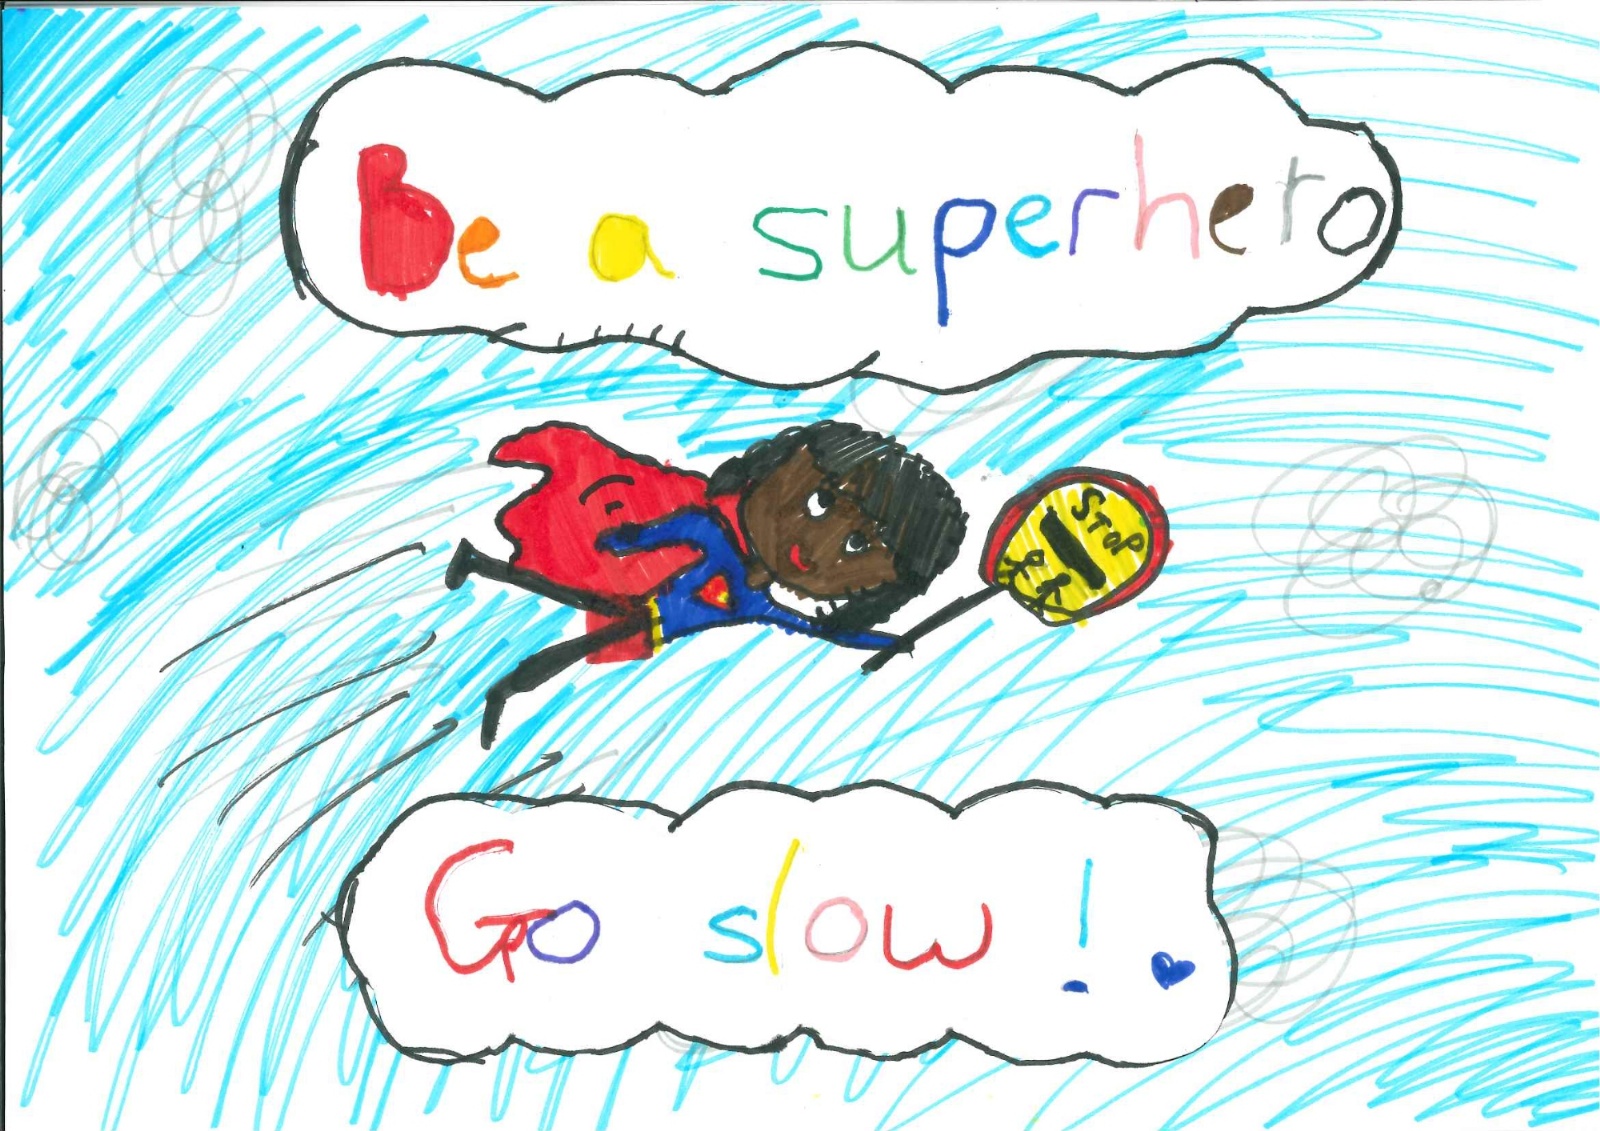 Road safety drawing for competition | How to draw road safety poster |Road  safety drawing oil pastel - YouTube